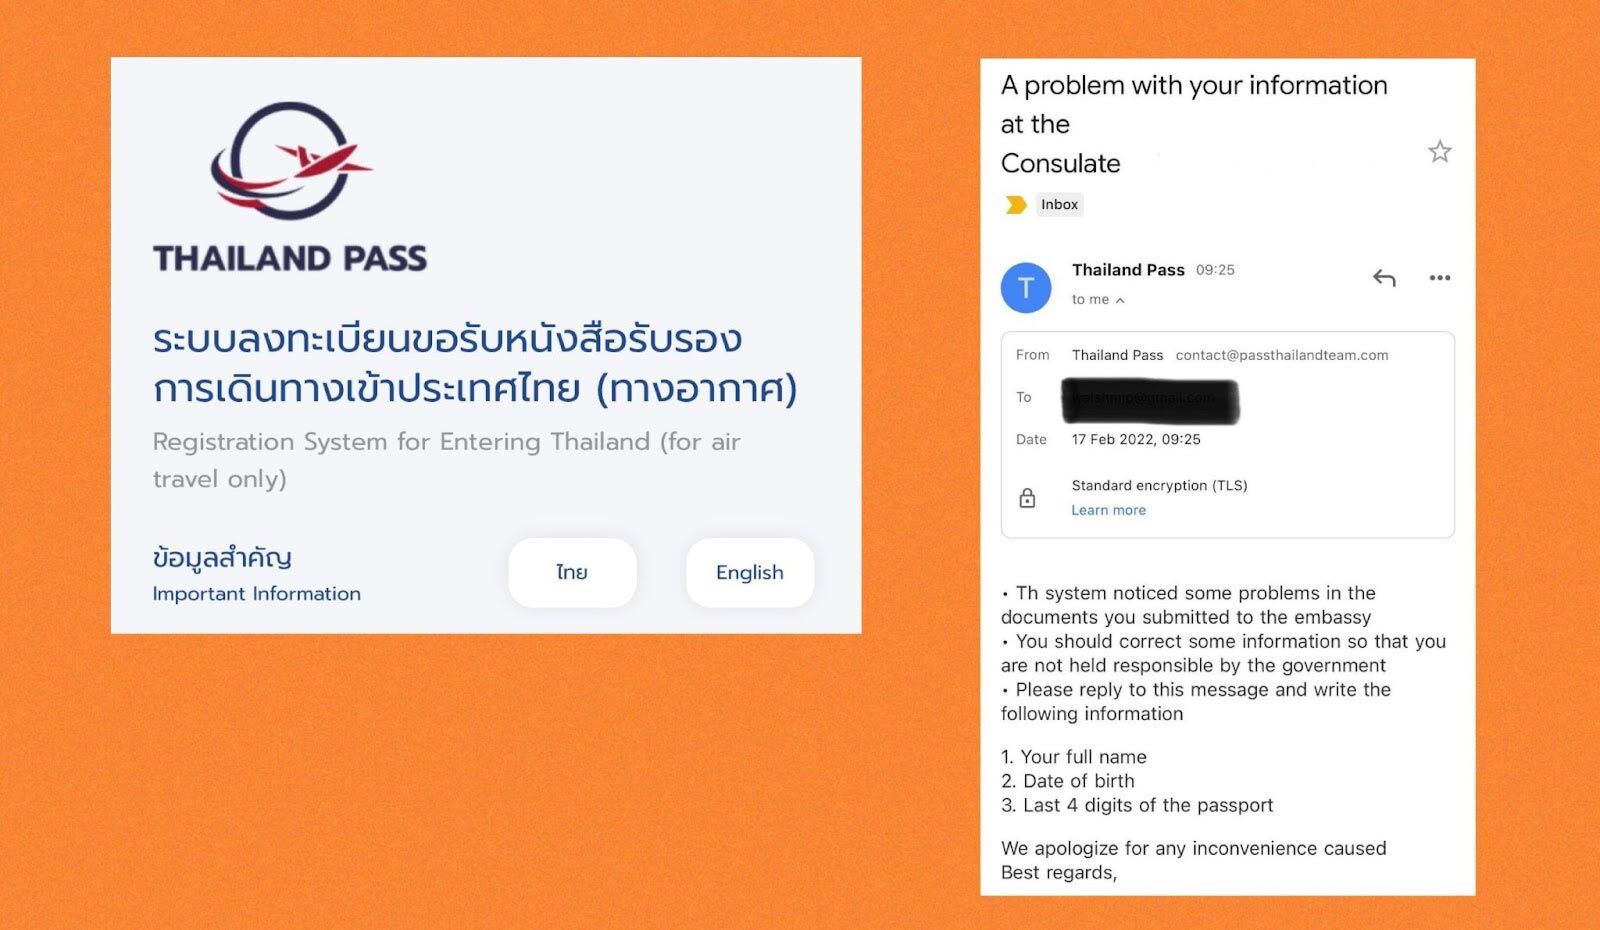 New Email Scam for Thailand Pass